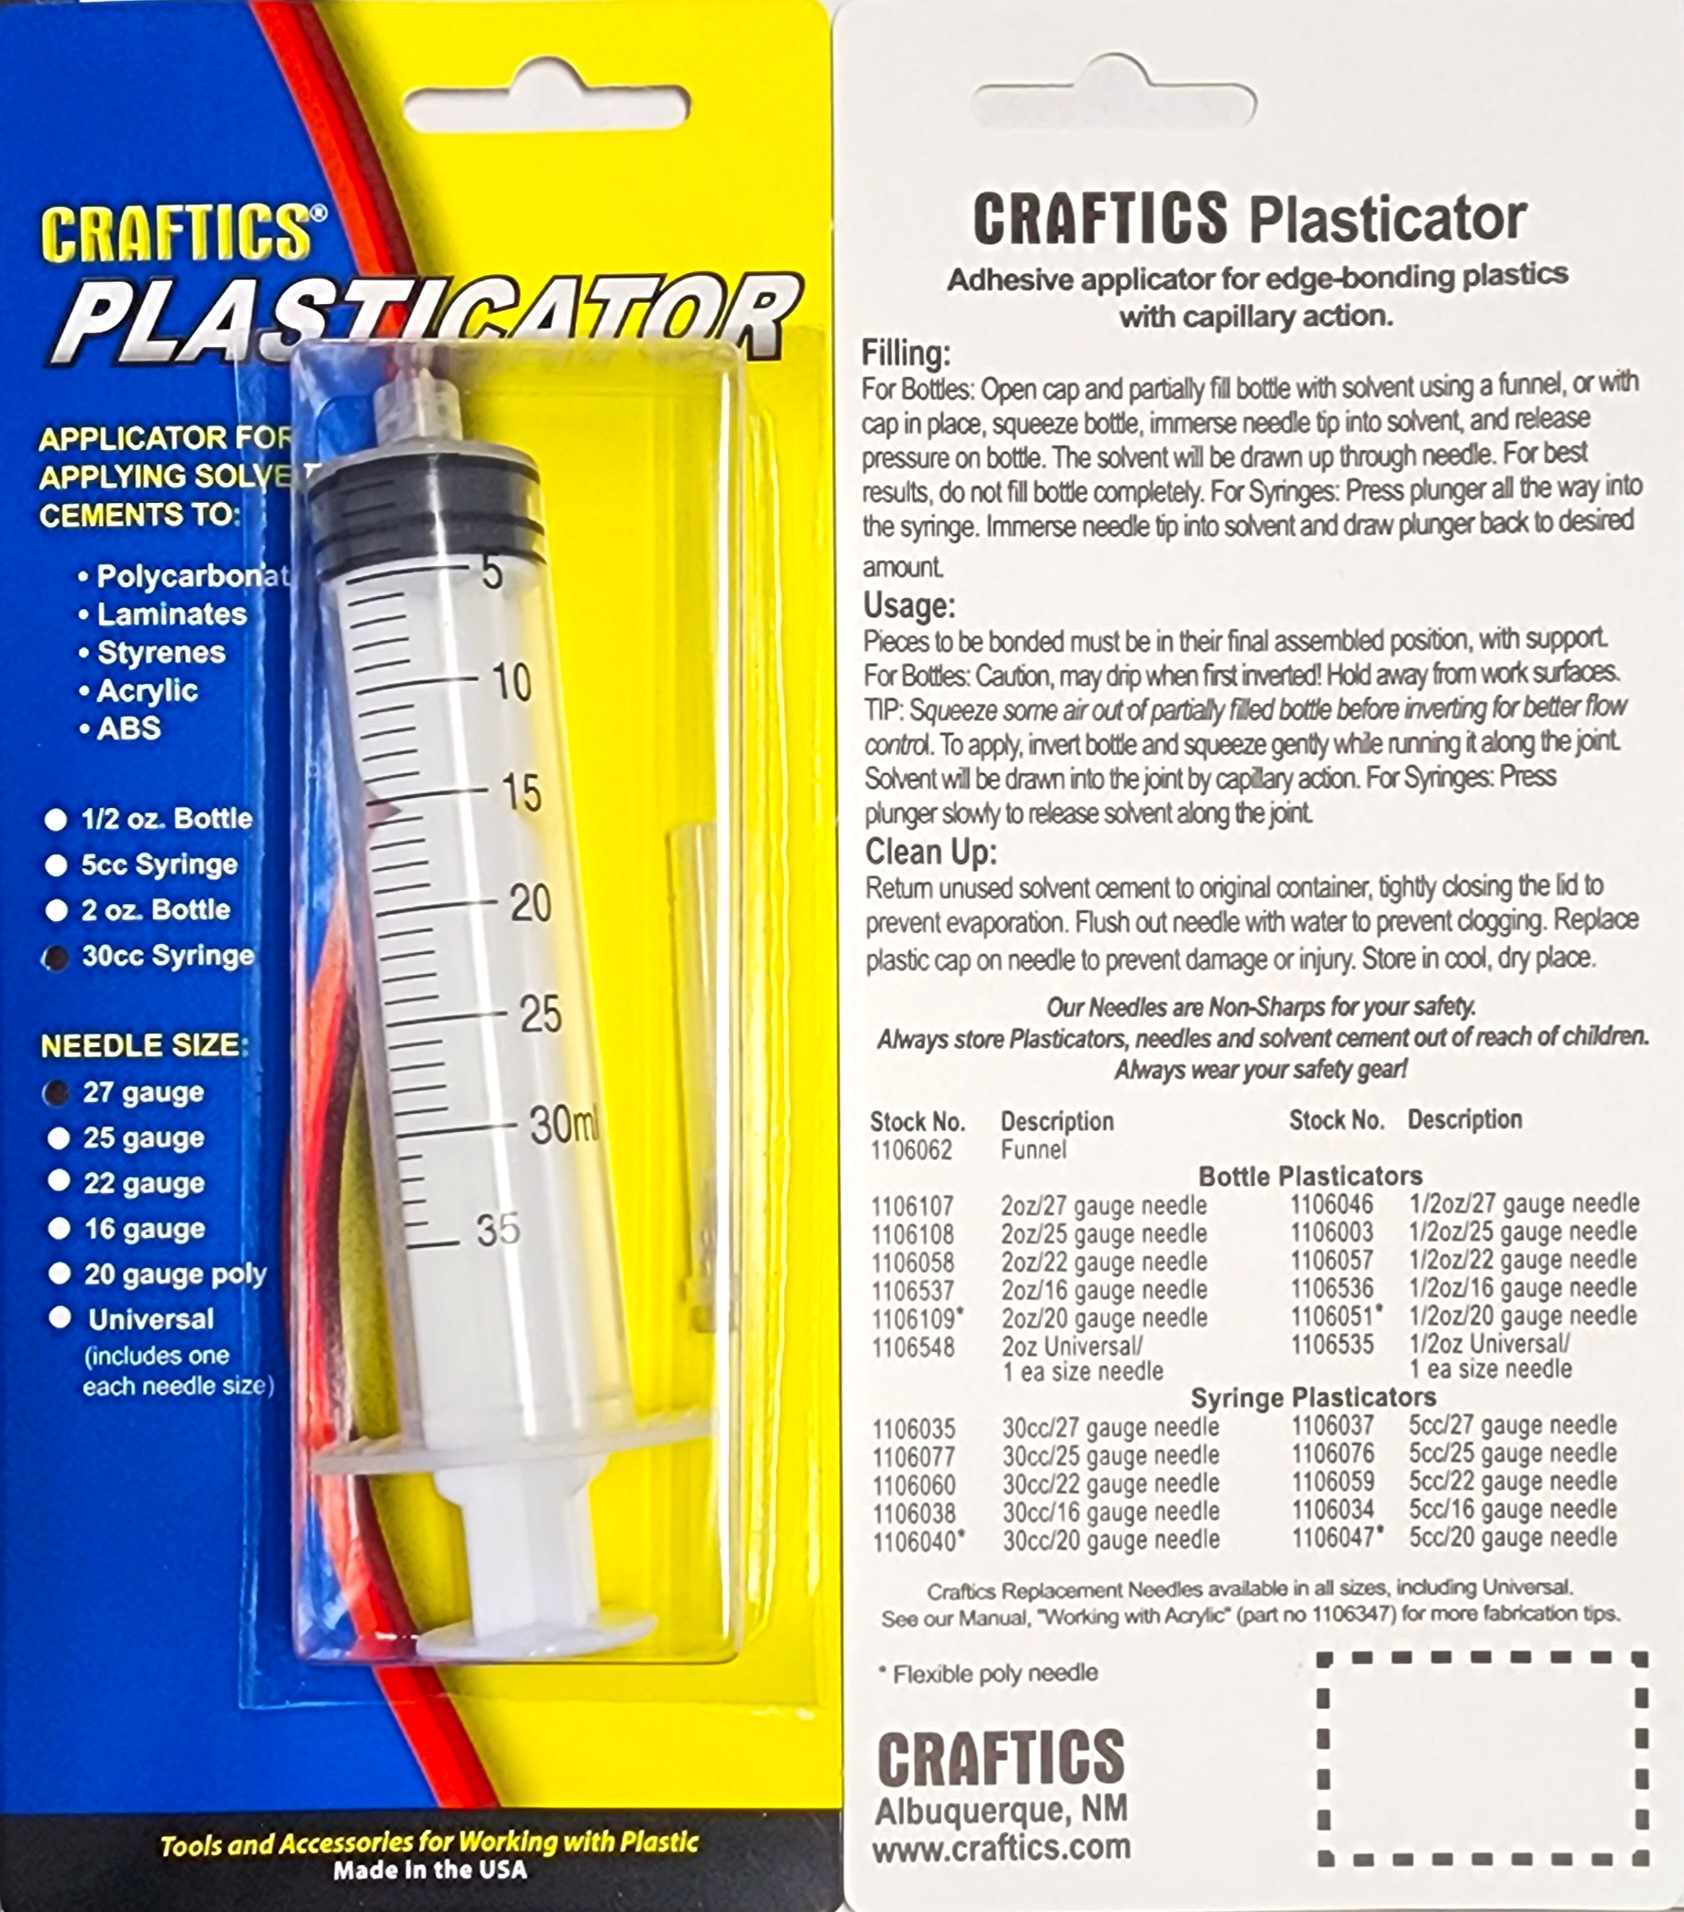 CRAFTICS - Tools and Accessories for Working with Plastic